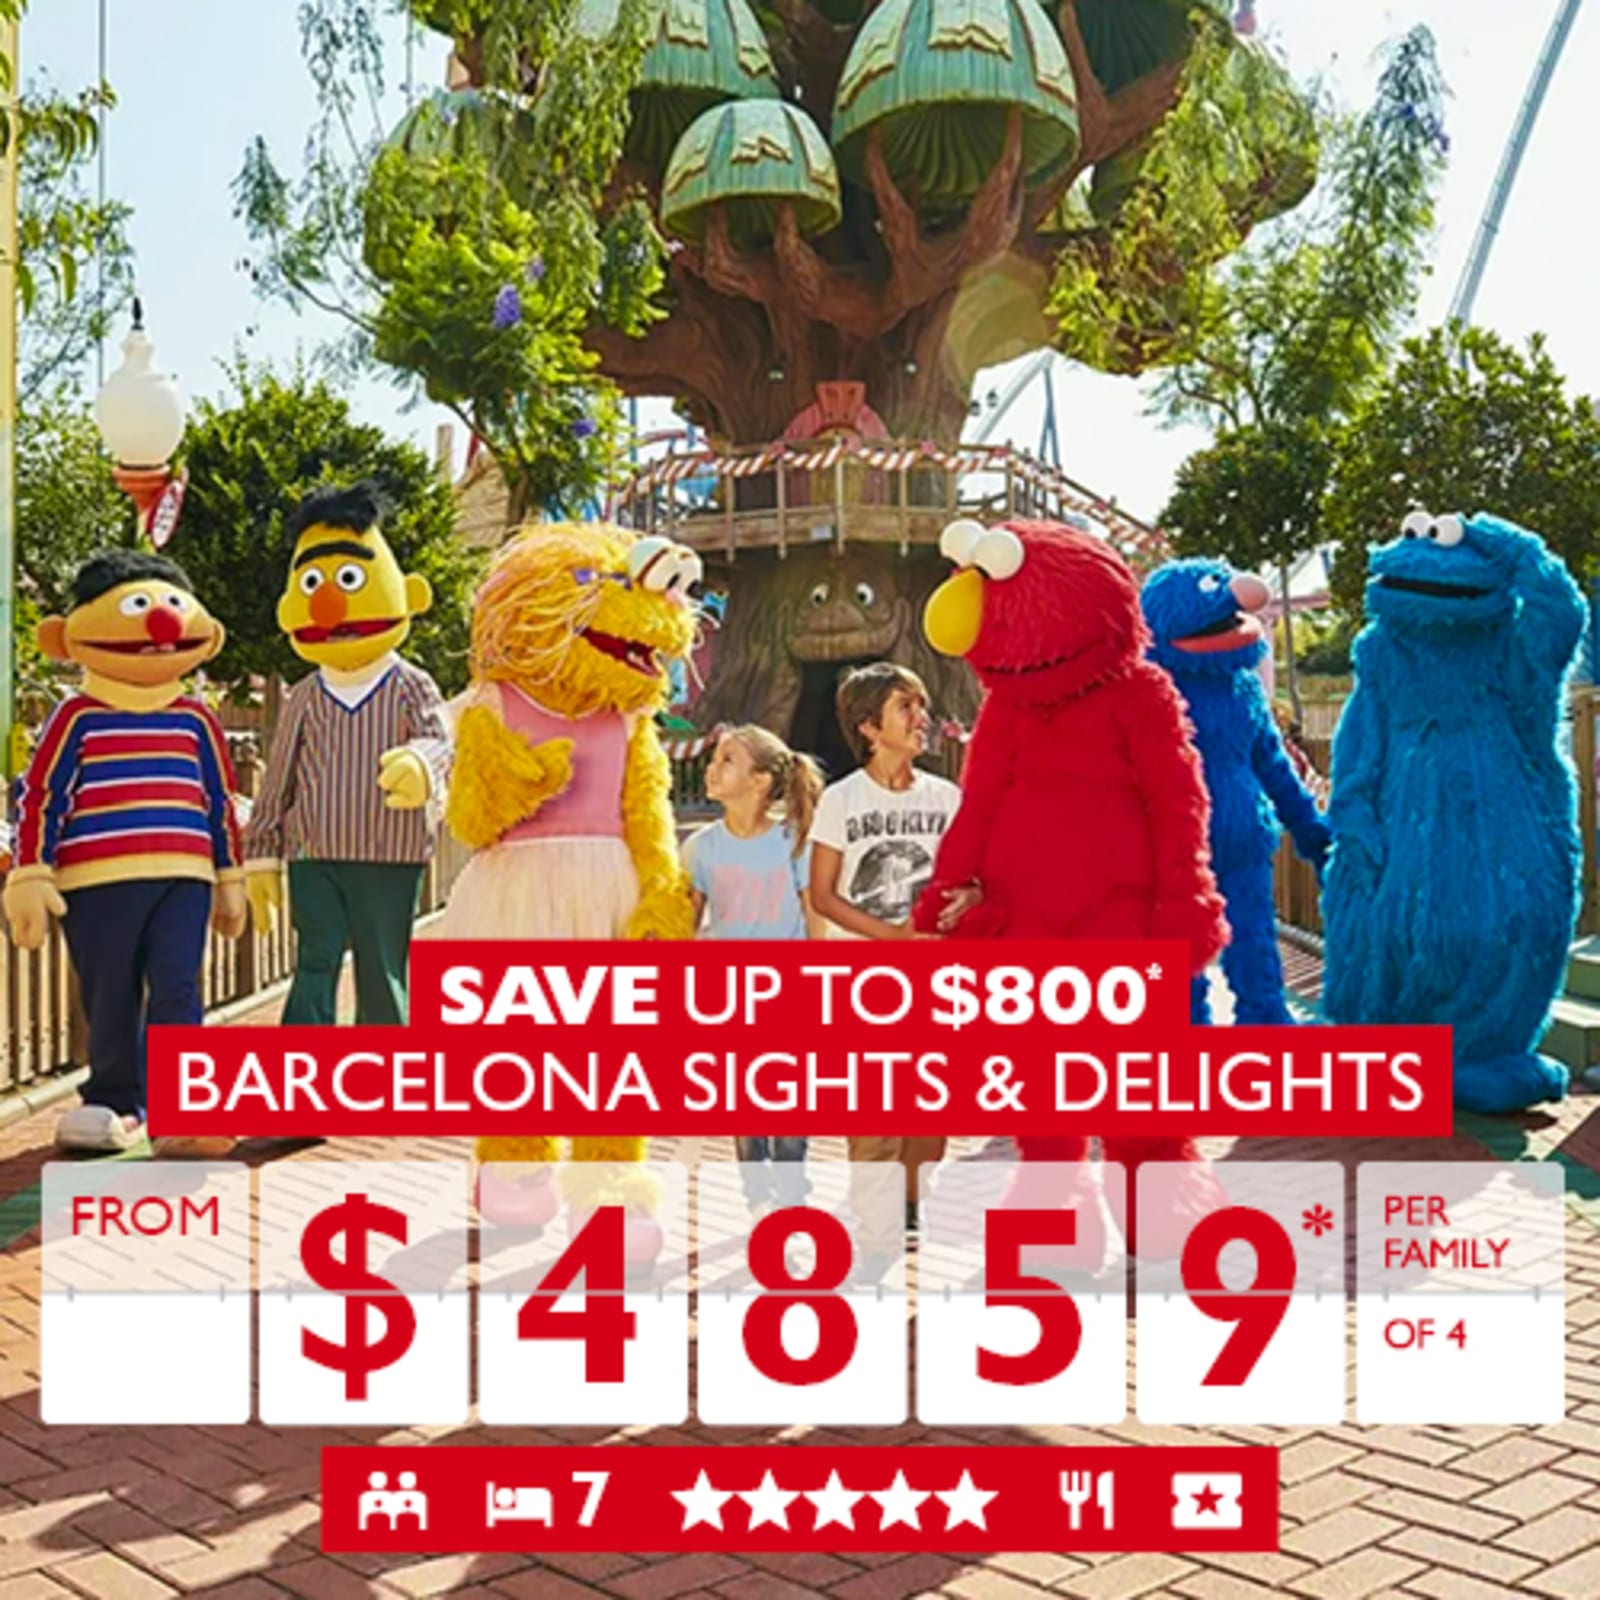 Save up to $800* Barcelona Sights & Delights from $4859* per family of 4